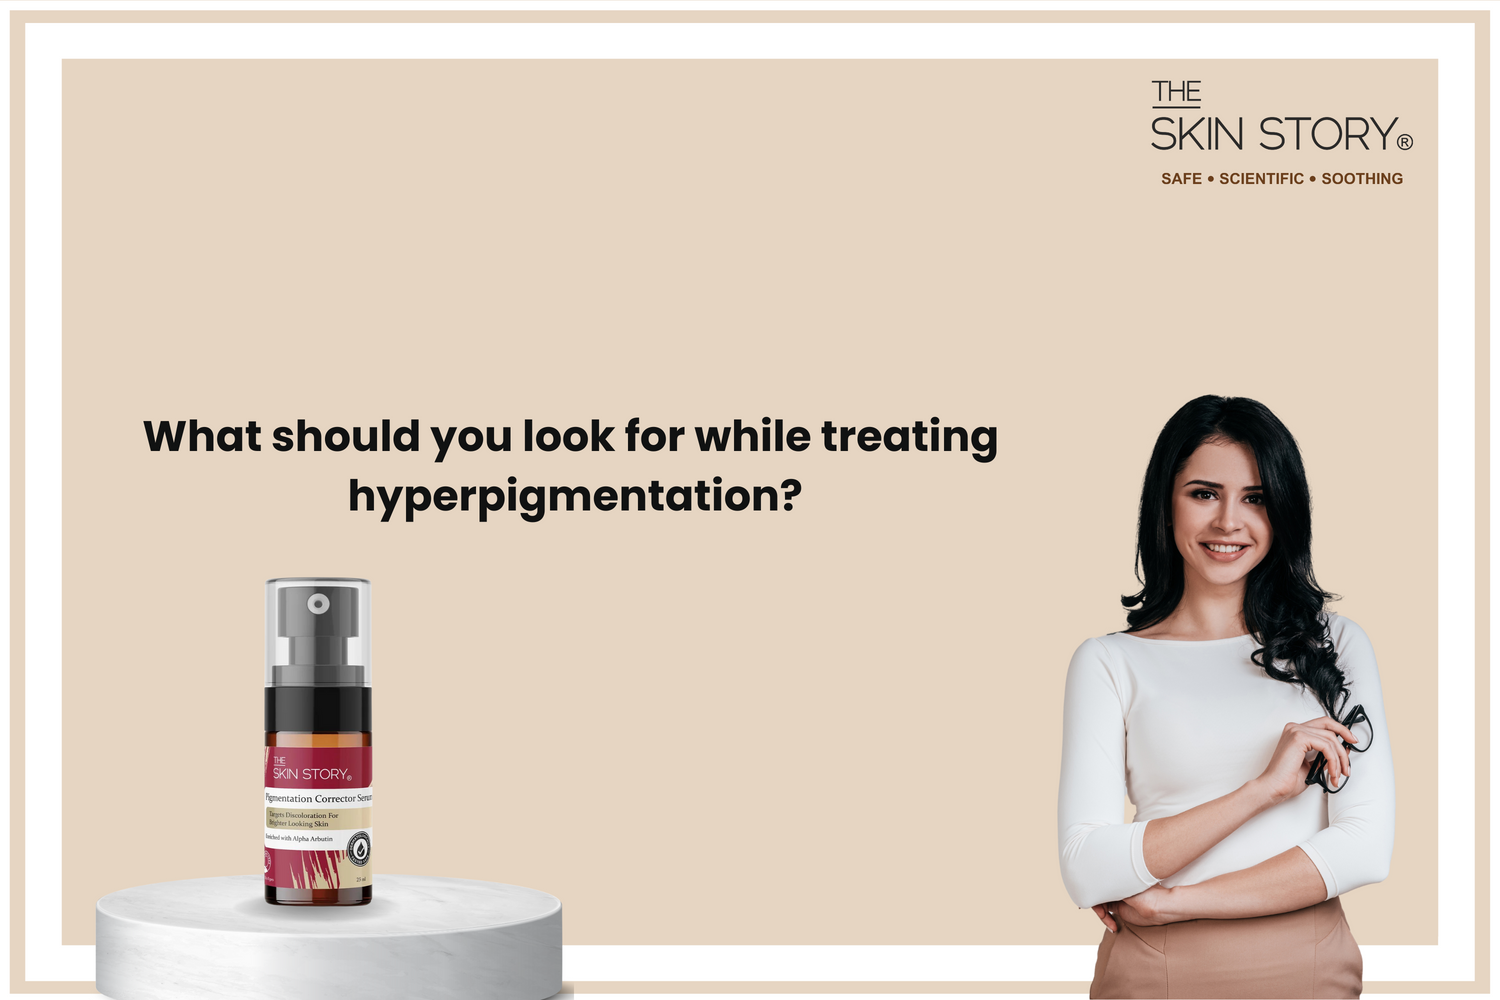 What should you look for while treating hyperpigmentation?